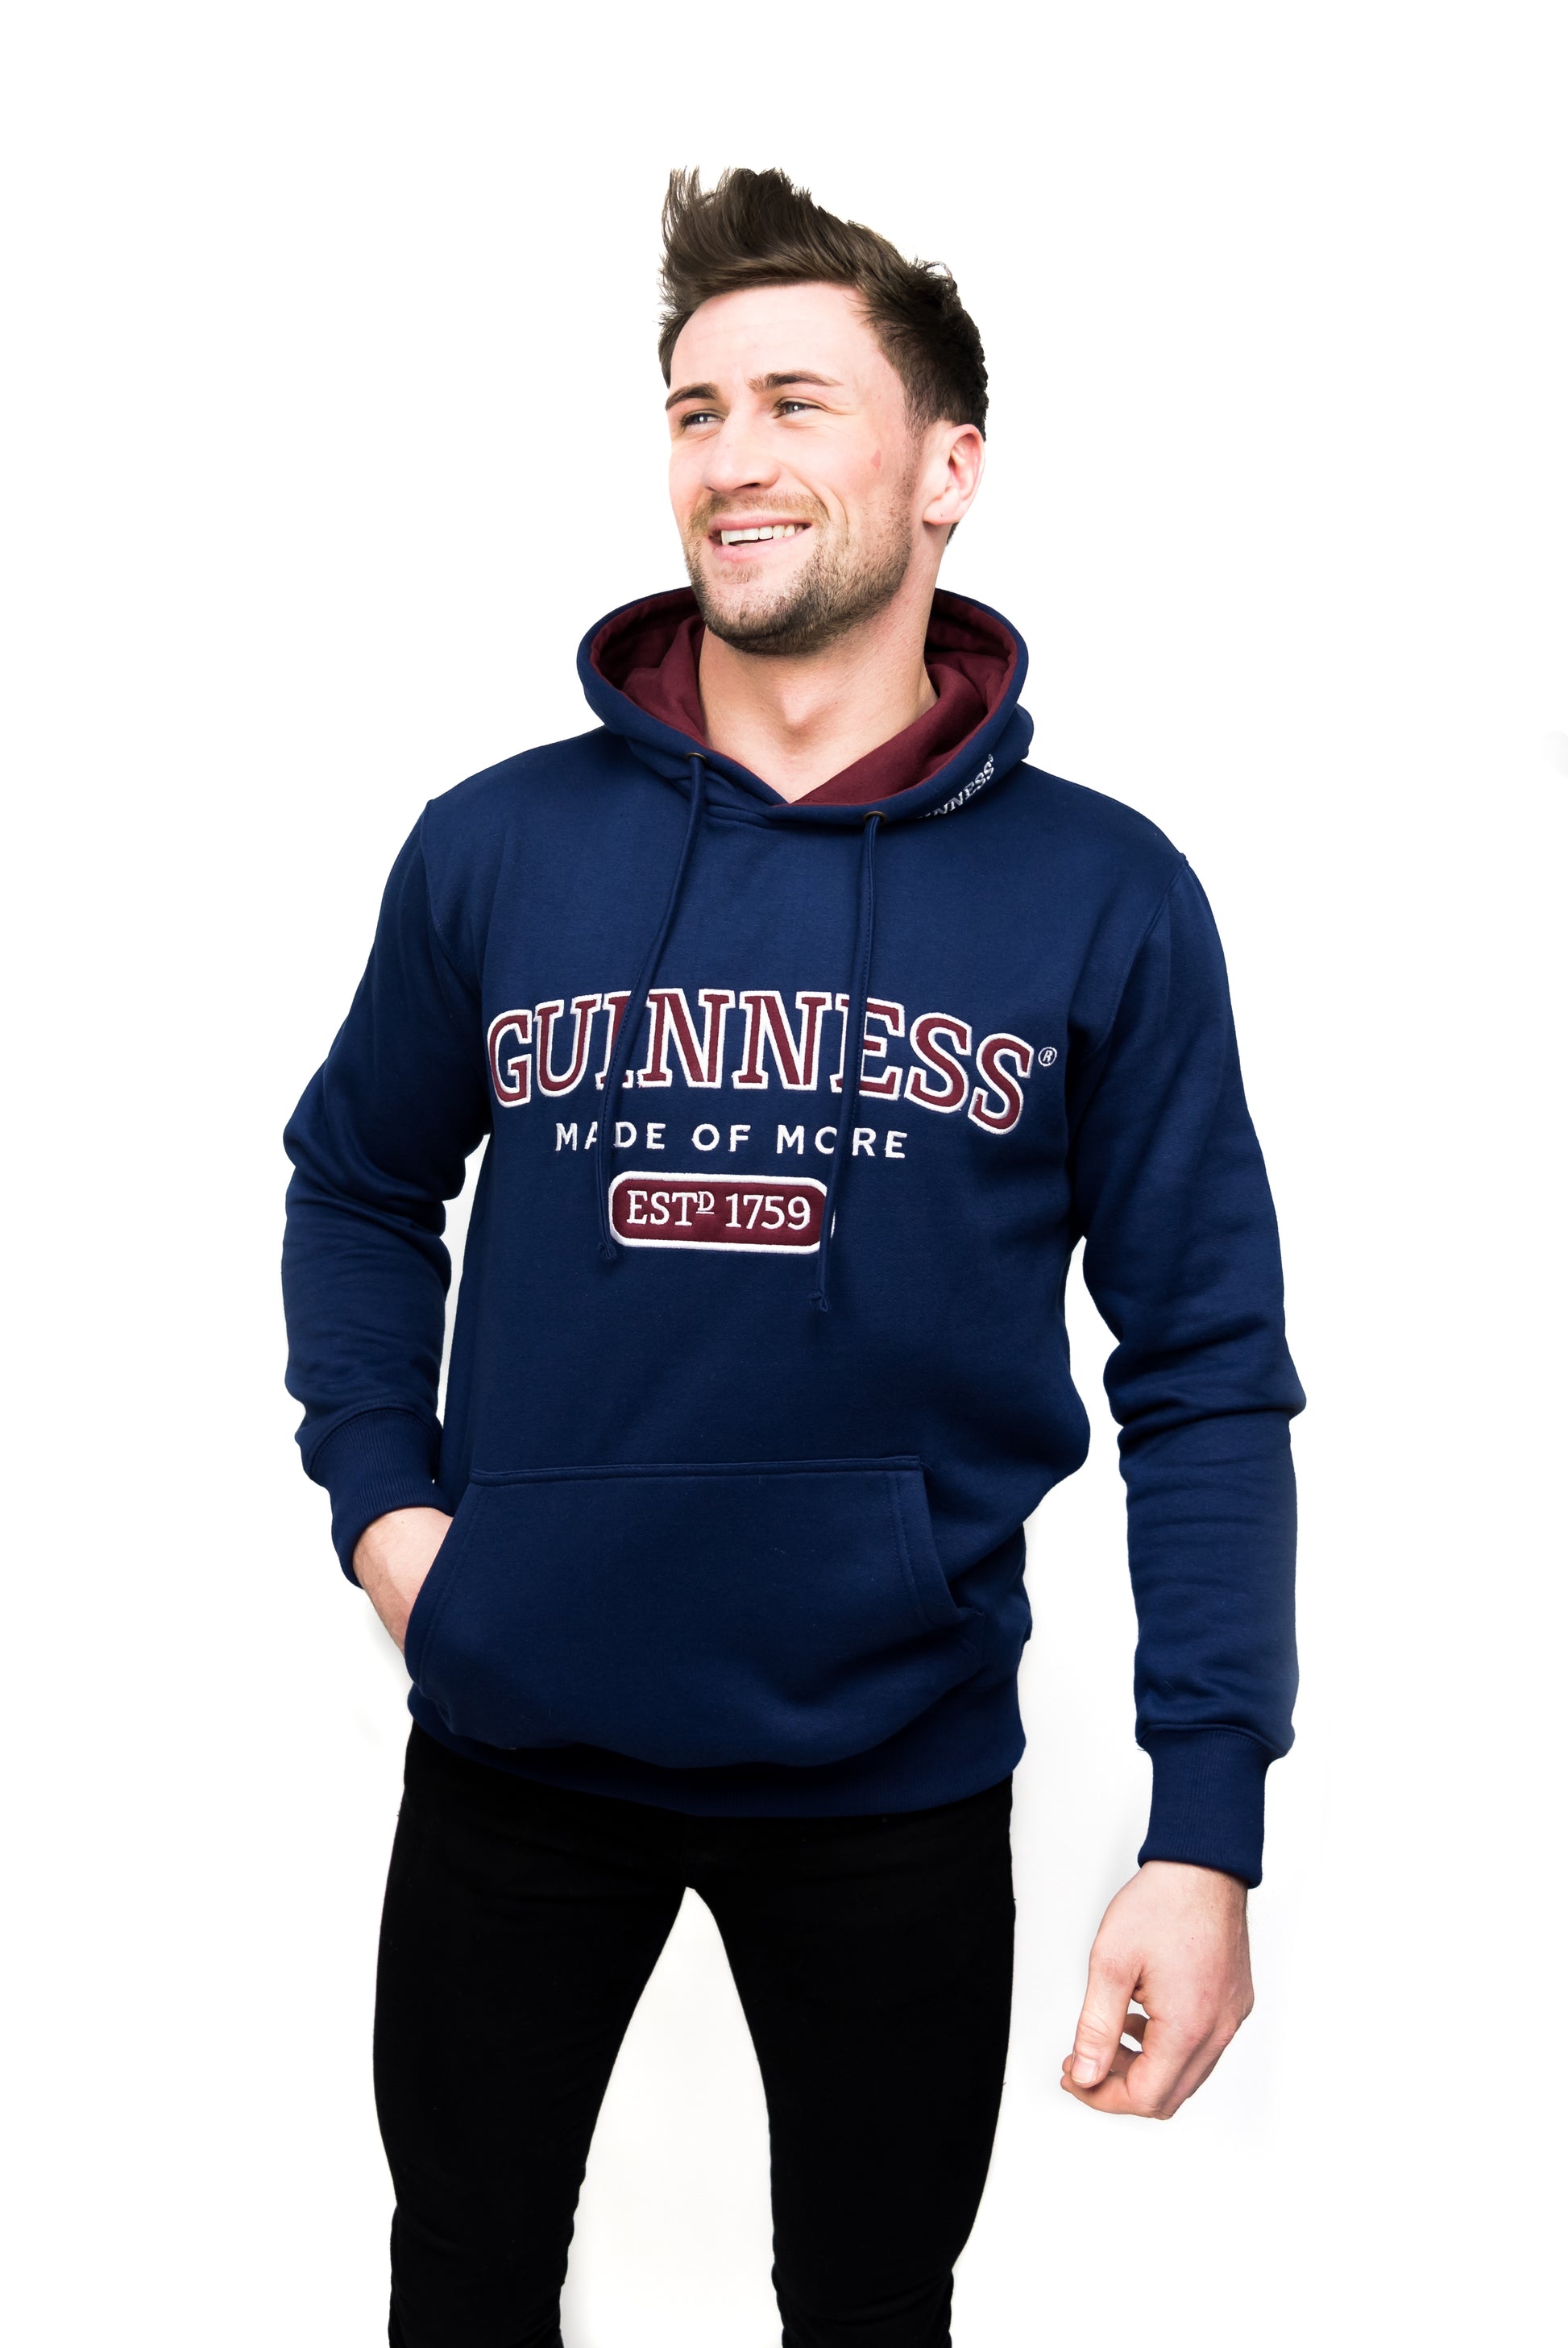 A young man wearing a navy hoodie with a red and white logo, resembling the Guinness UK Light Blue Hooded Sweatshirt.